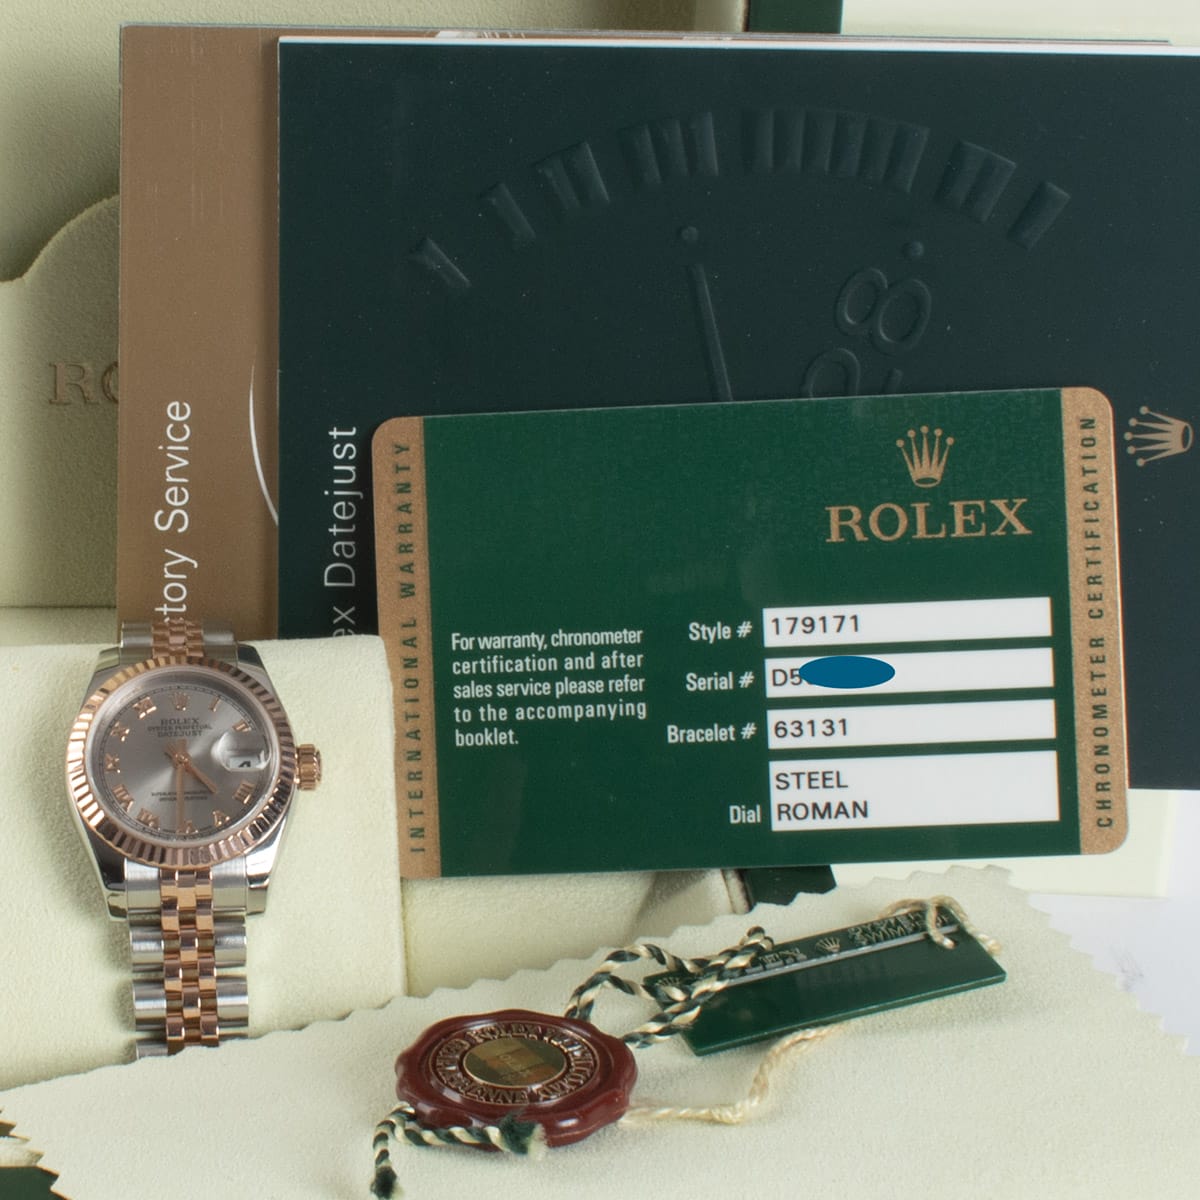 View in Box of Ladies Datejust